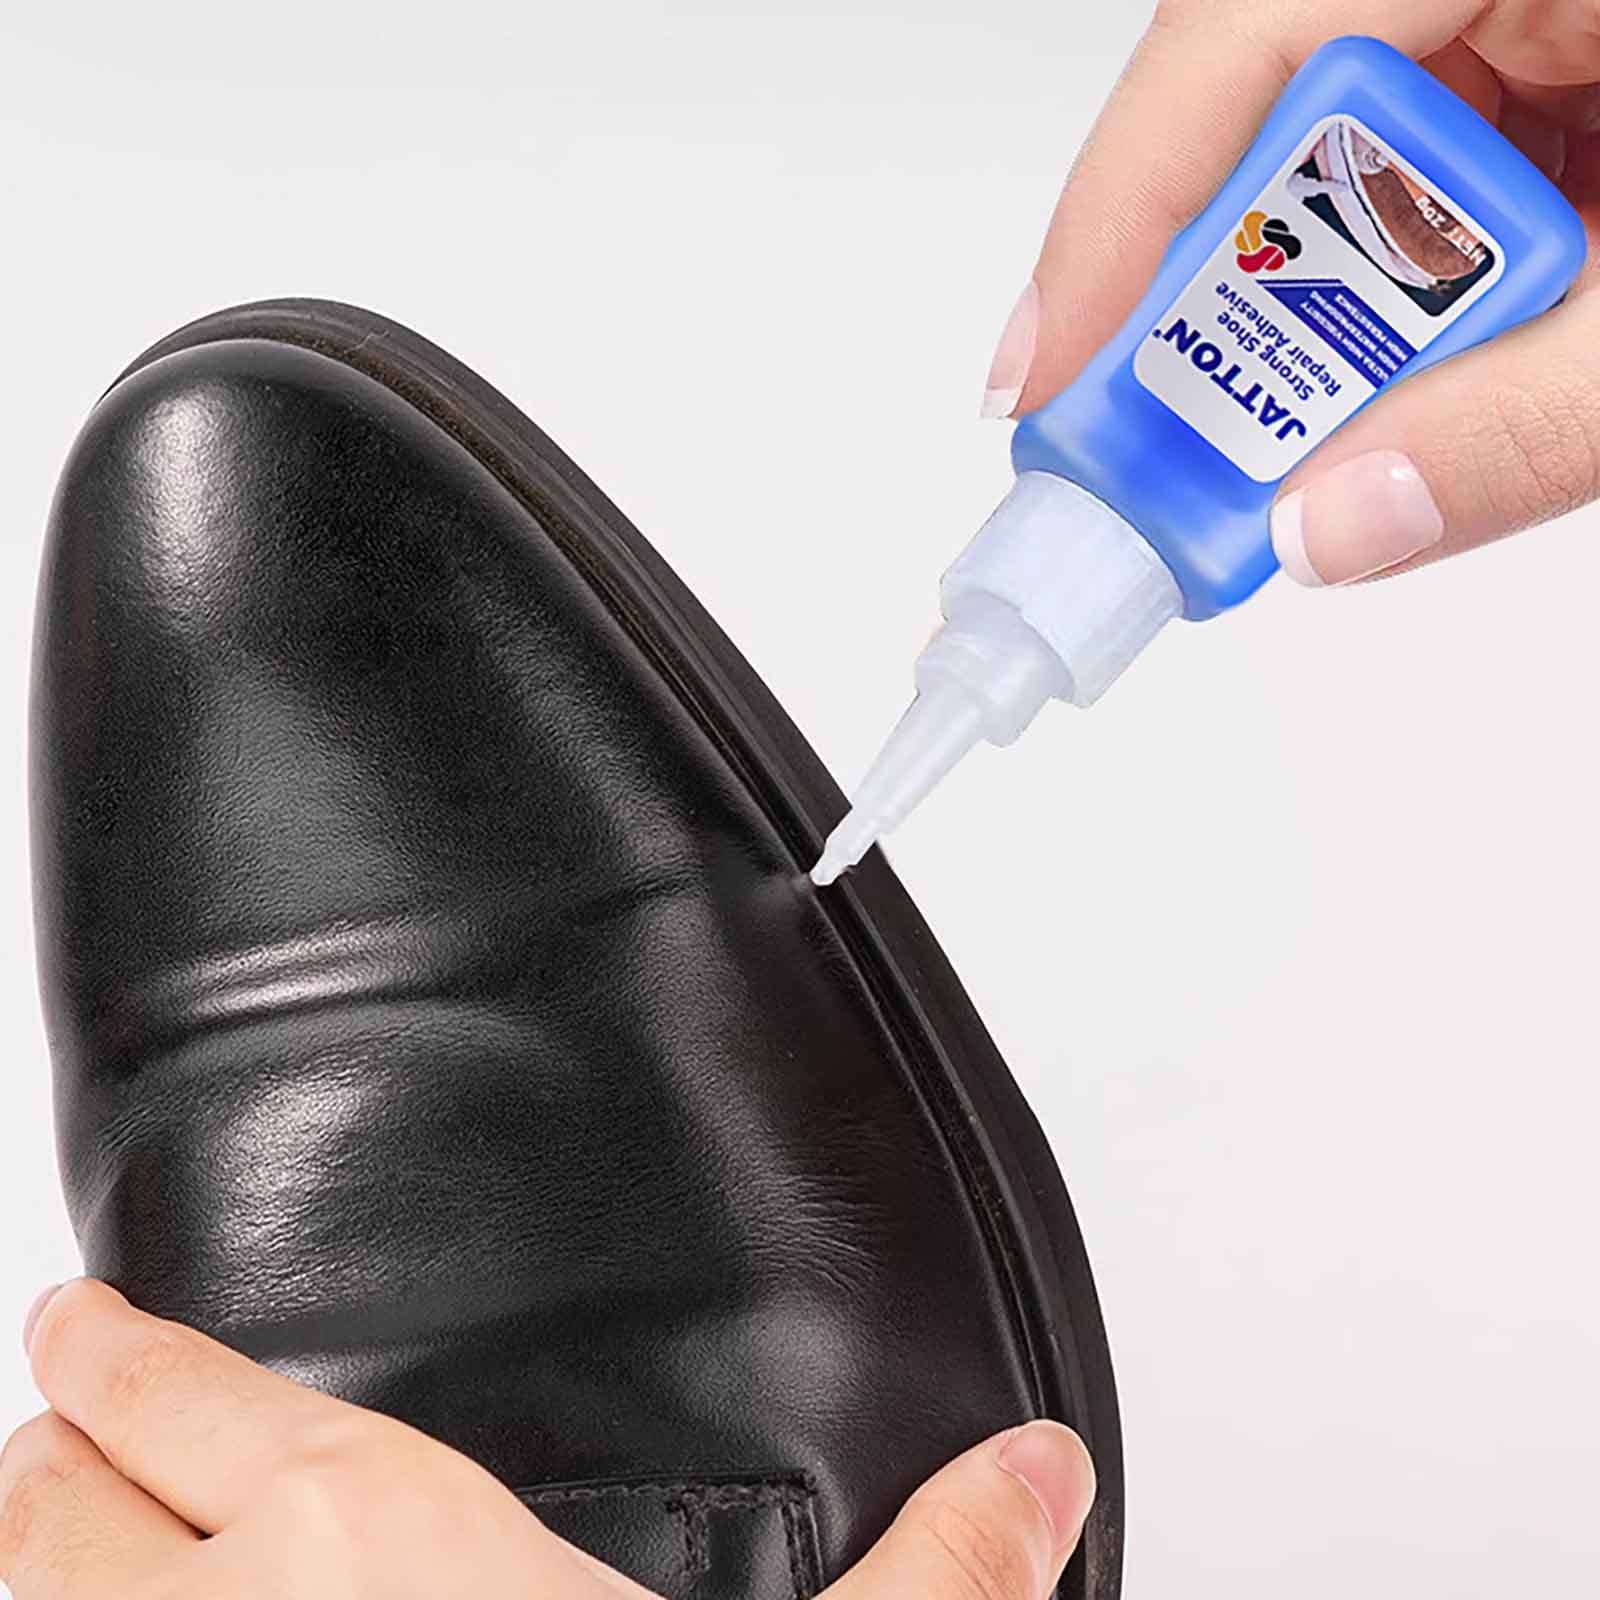 Shoe Sole Glue Universal Strong Shoe Factory Special Leather Shoe Repair  Glue Waterproof Quick Dry Super